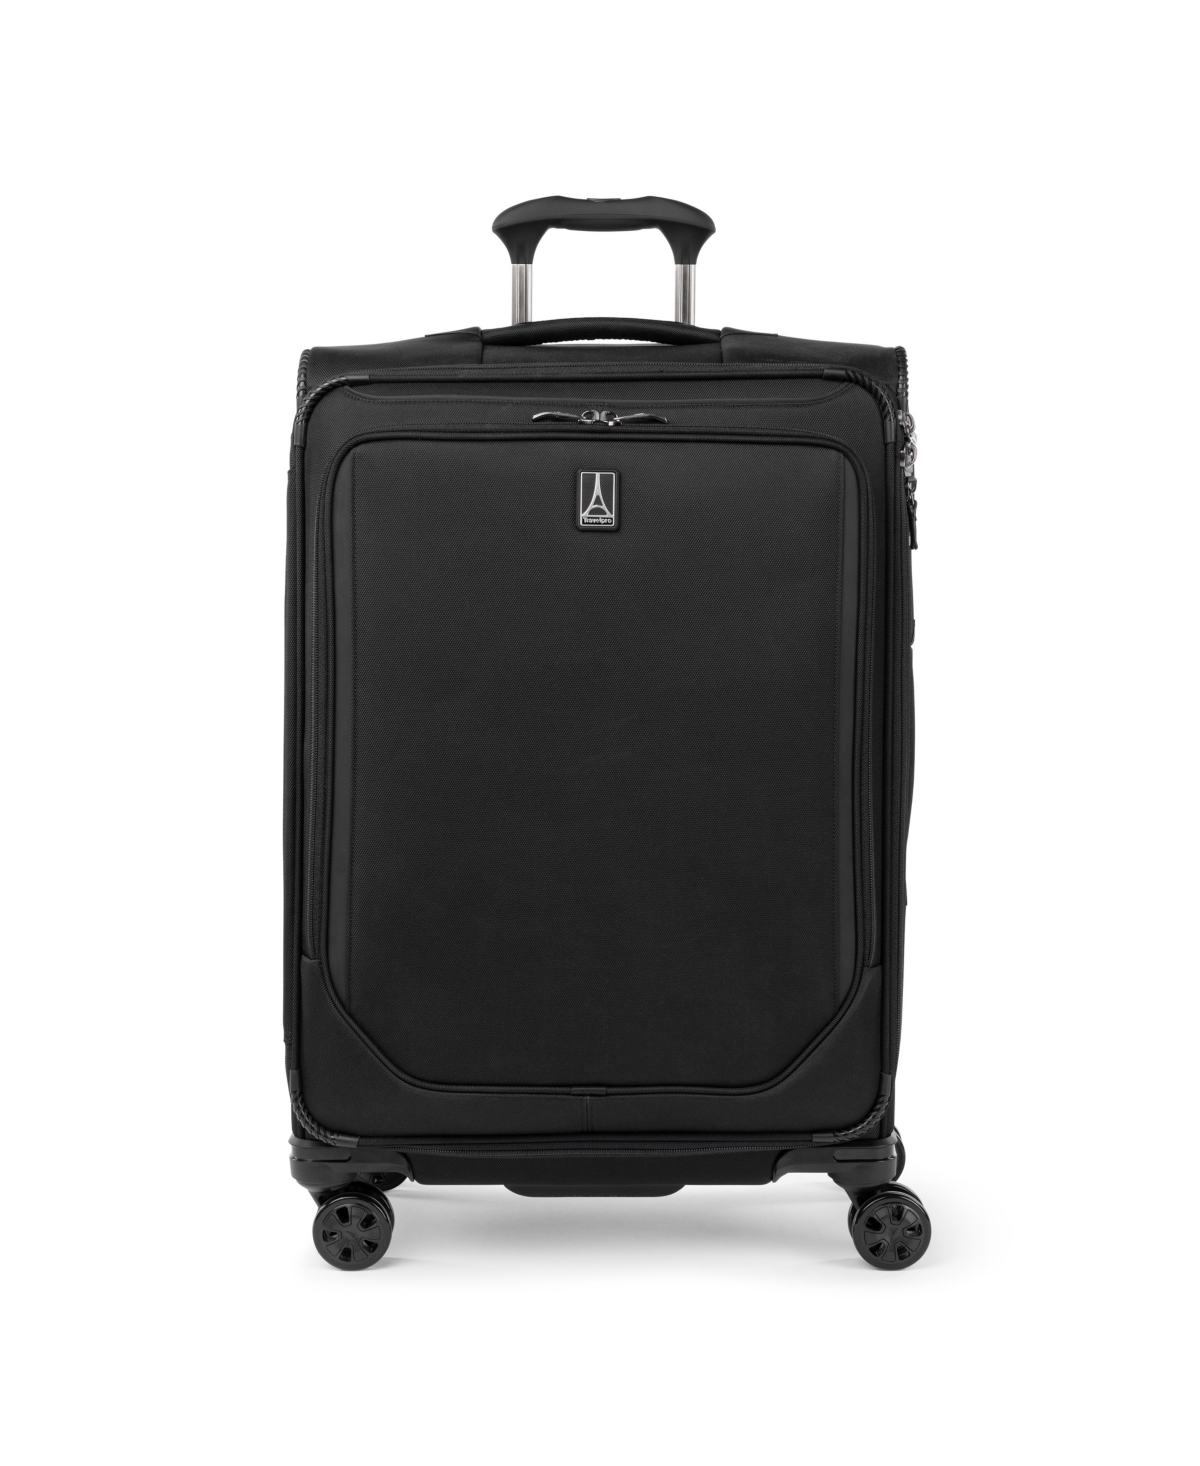 New! Travelpro Crew Classic Medium Check-in Expandable Spinner Luggage - Jet Black